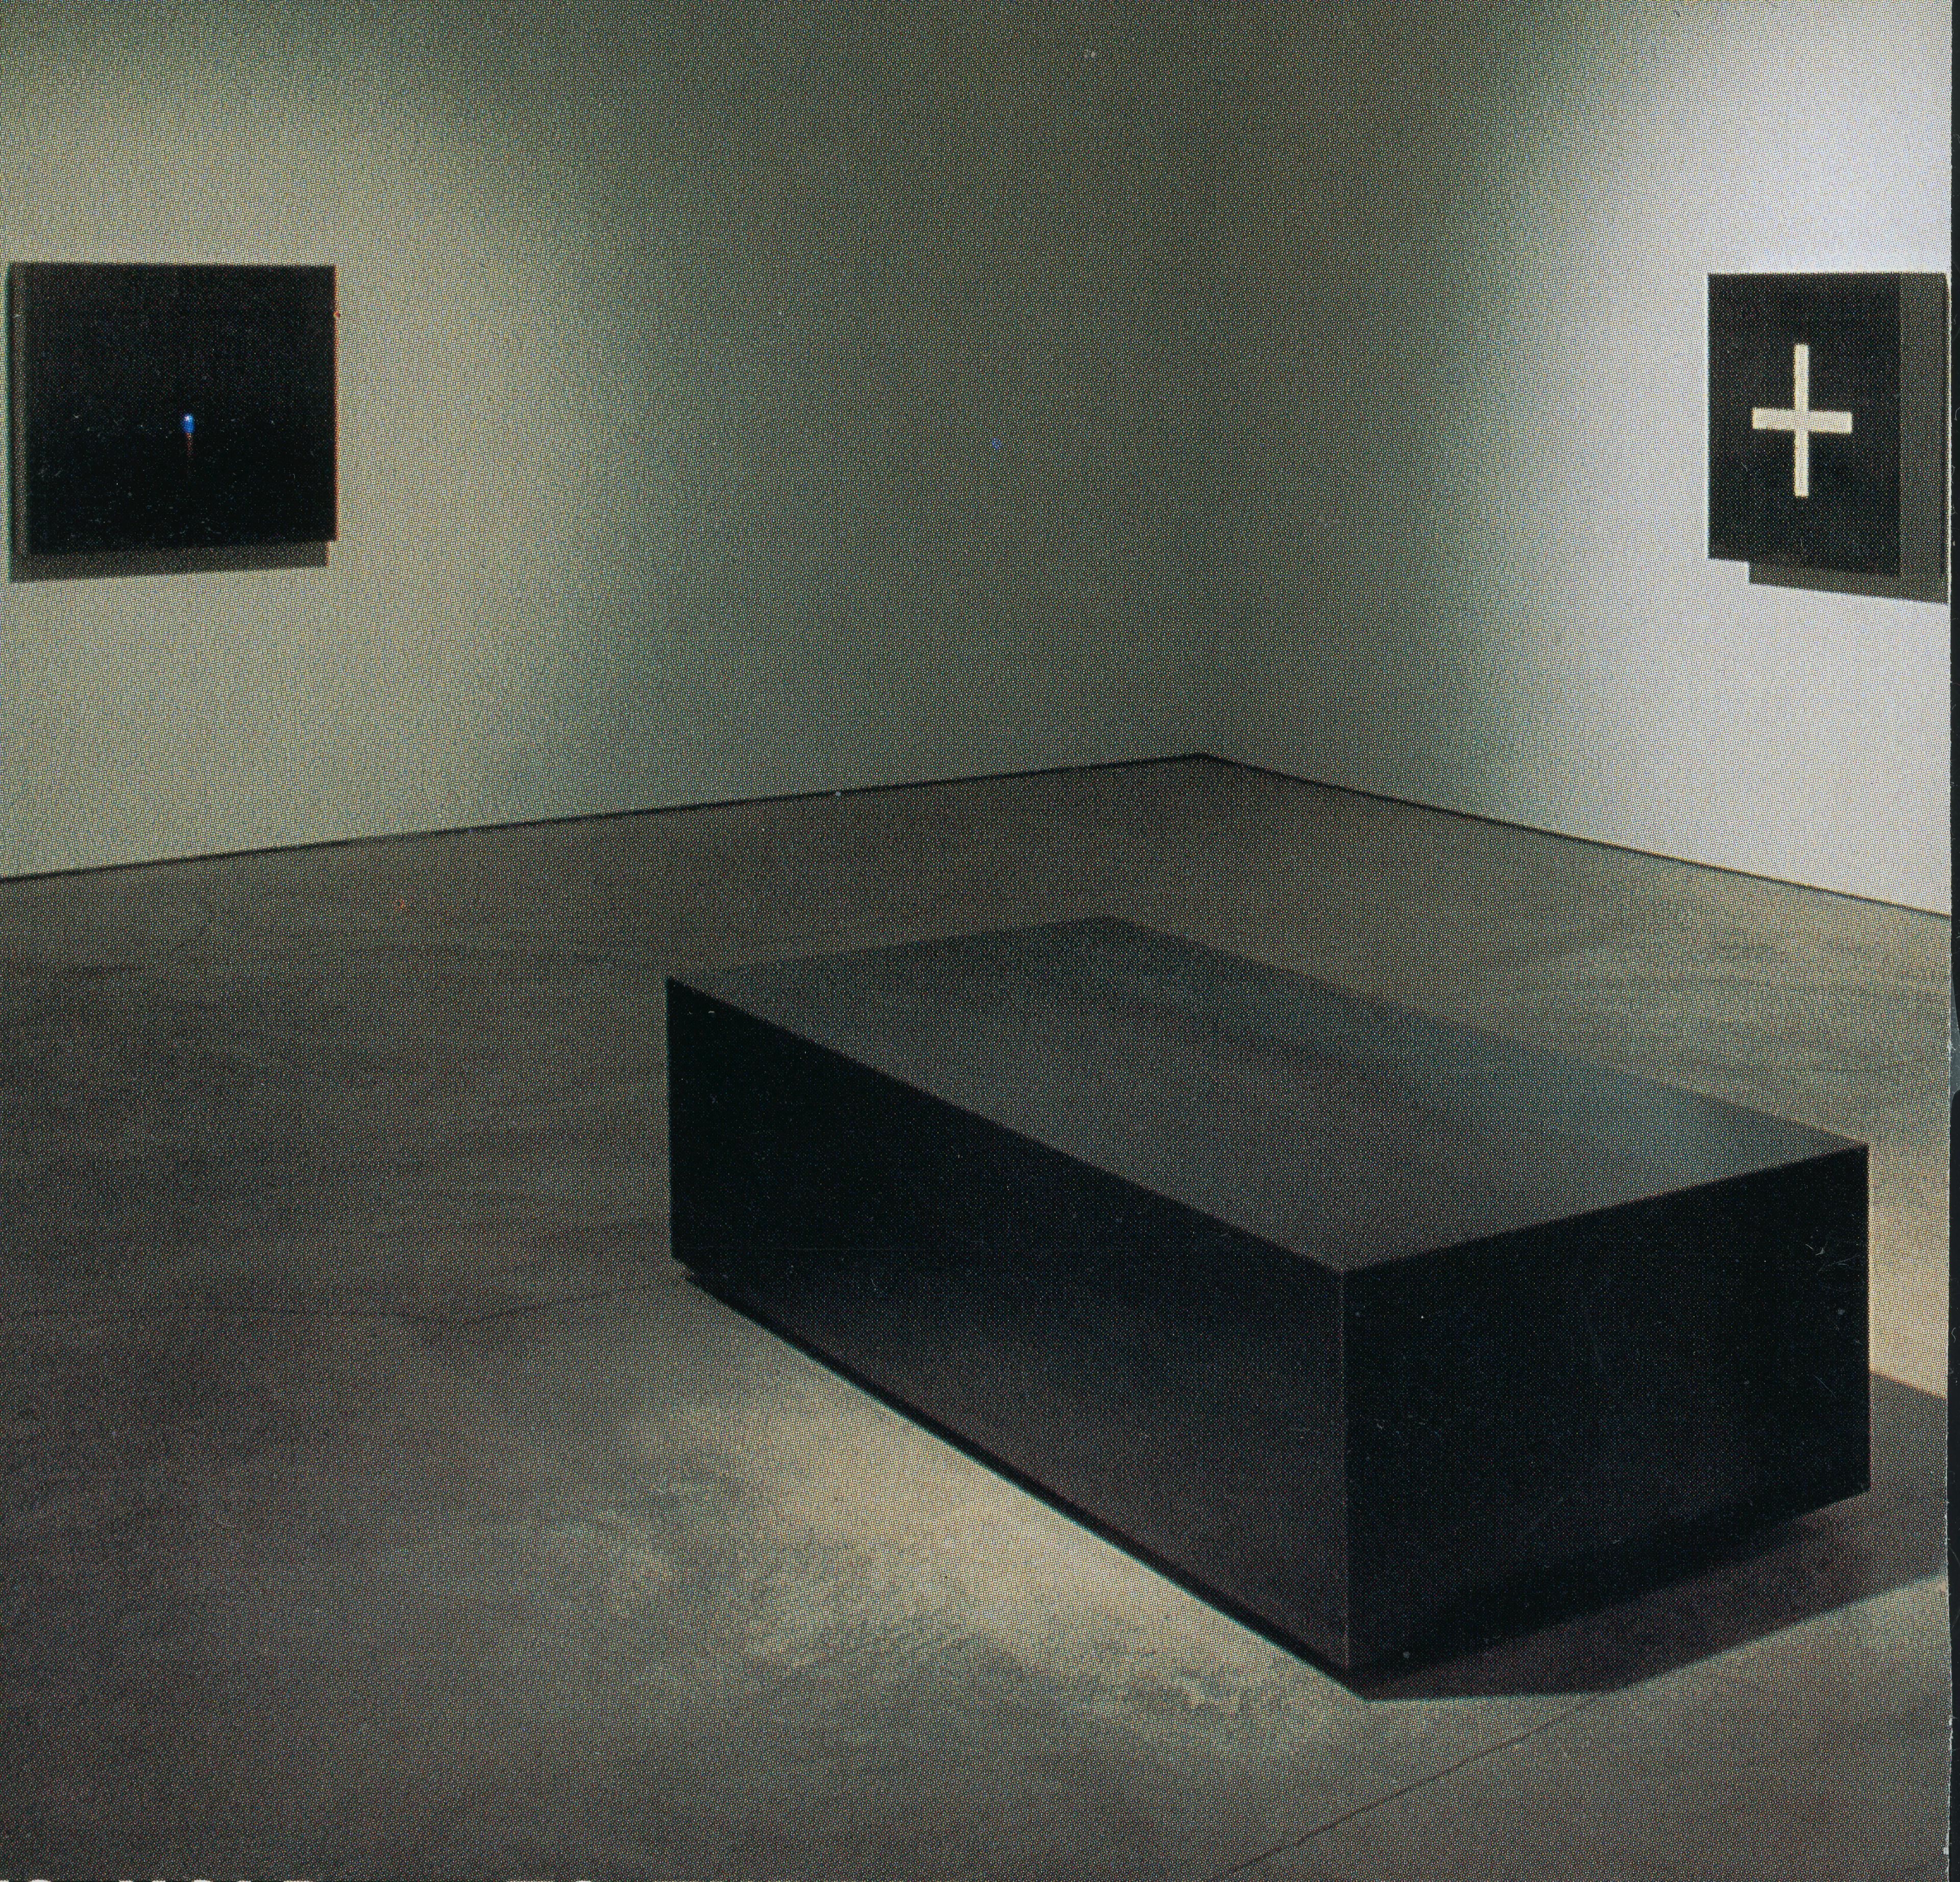 A large steel-made sculpture is placed in the middle of the dimly lit gallery. It is rectangular and has a tarnished dark grey colour. The sculpture is directly placed on the floor. Several other steel-made works are also installed on the walls.